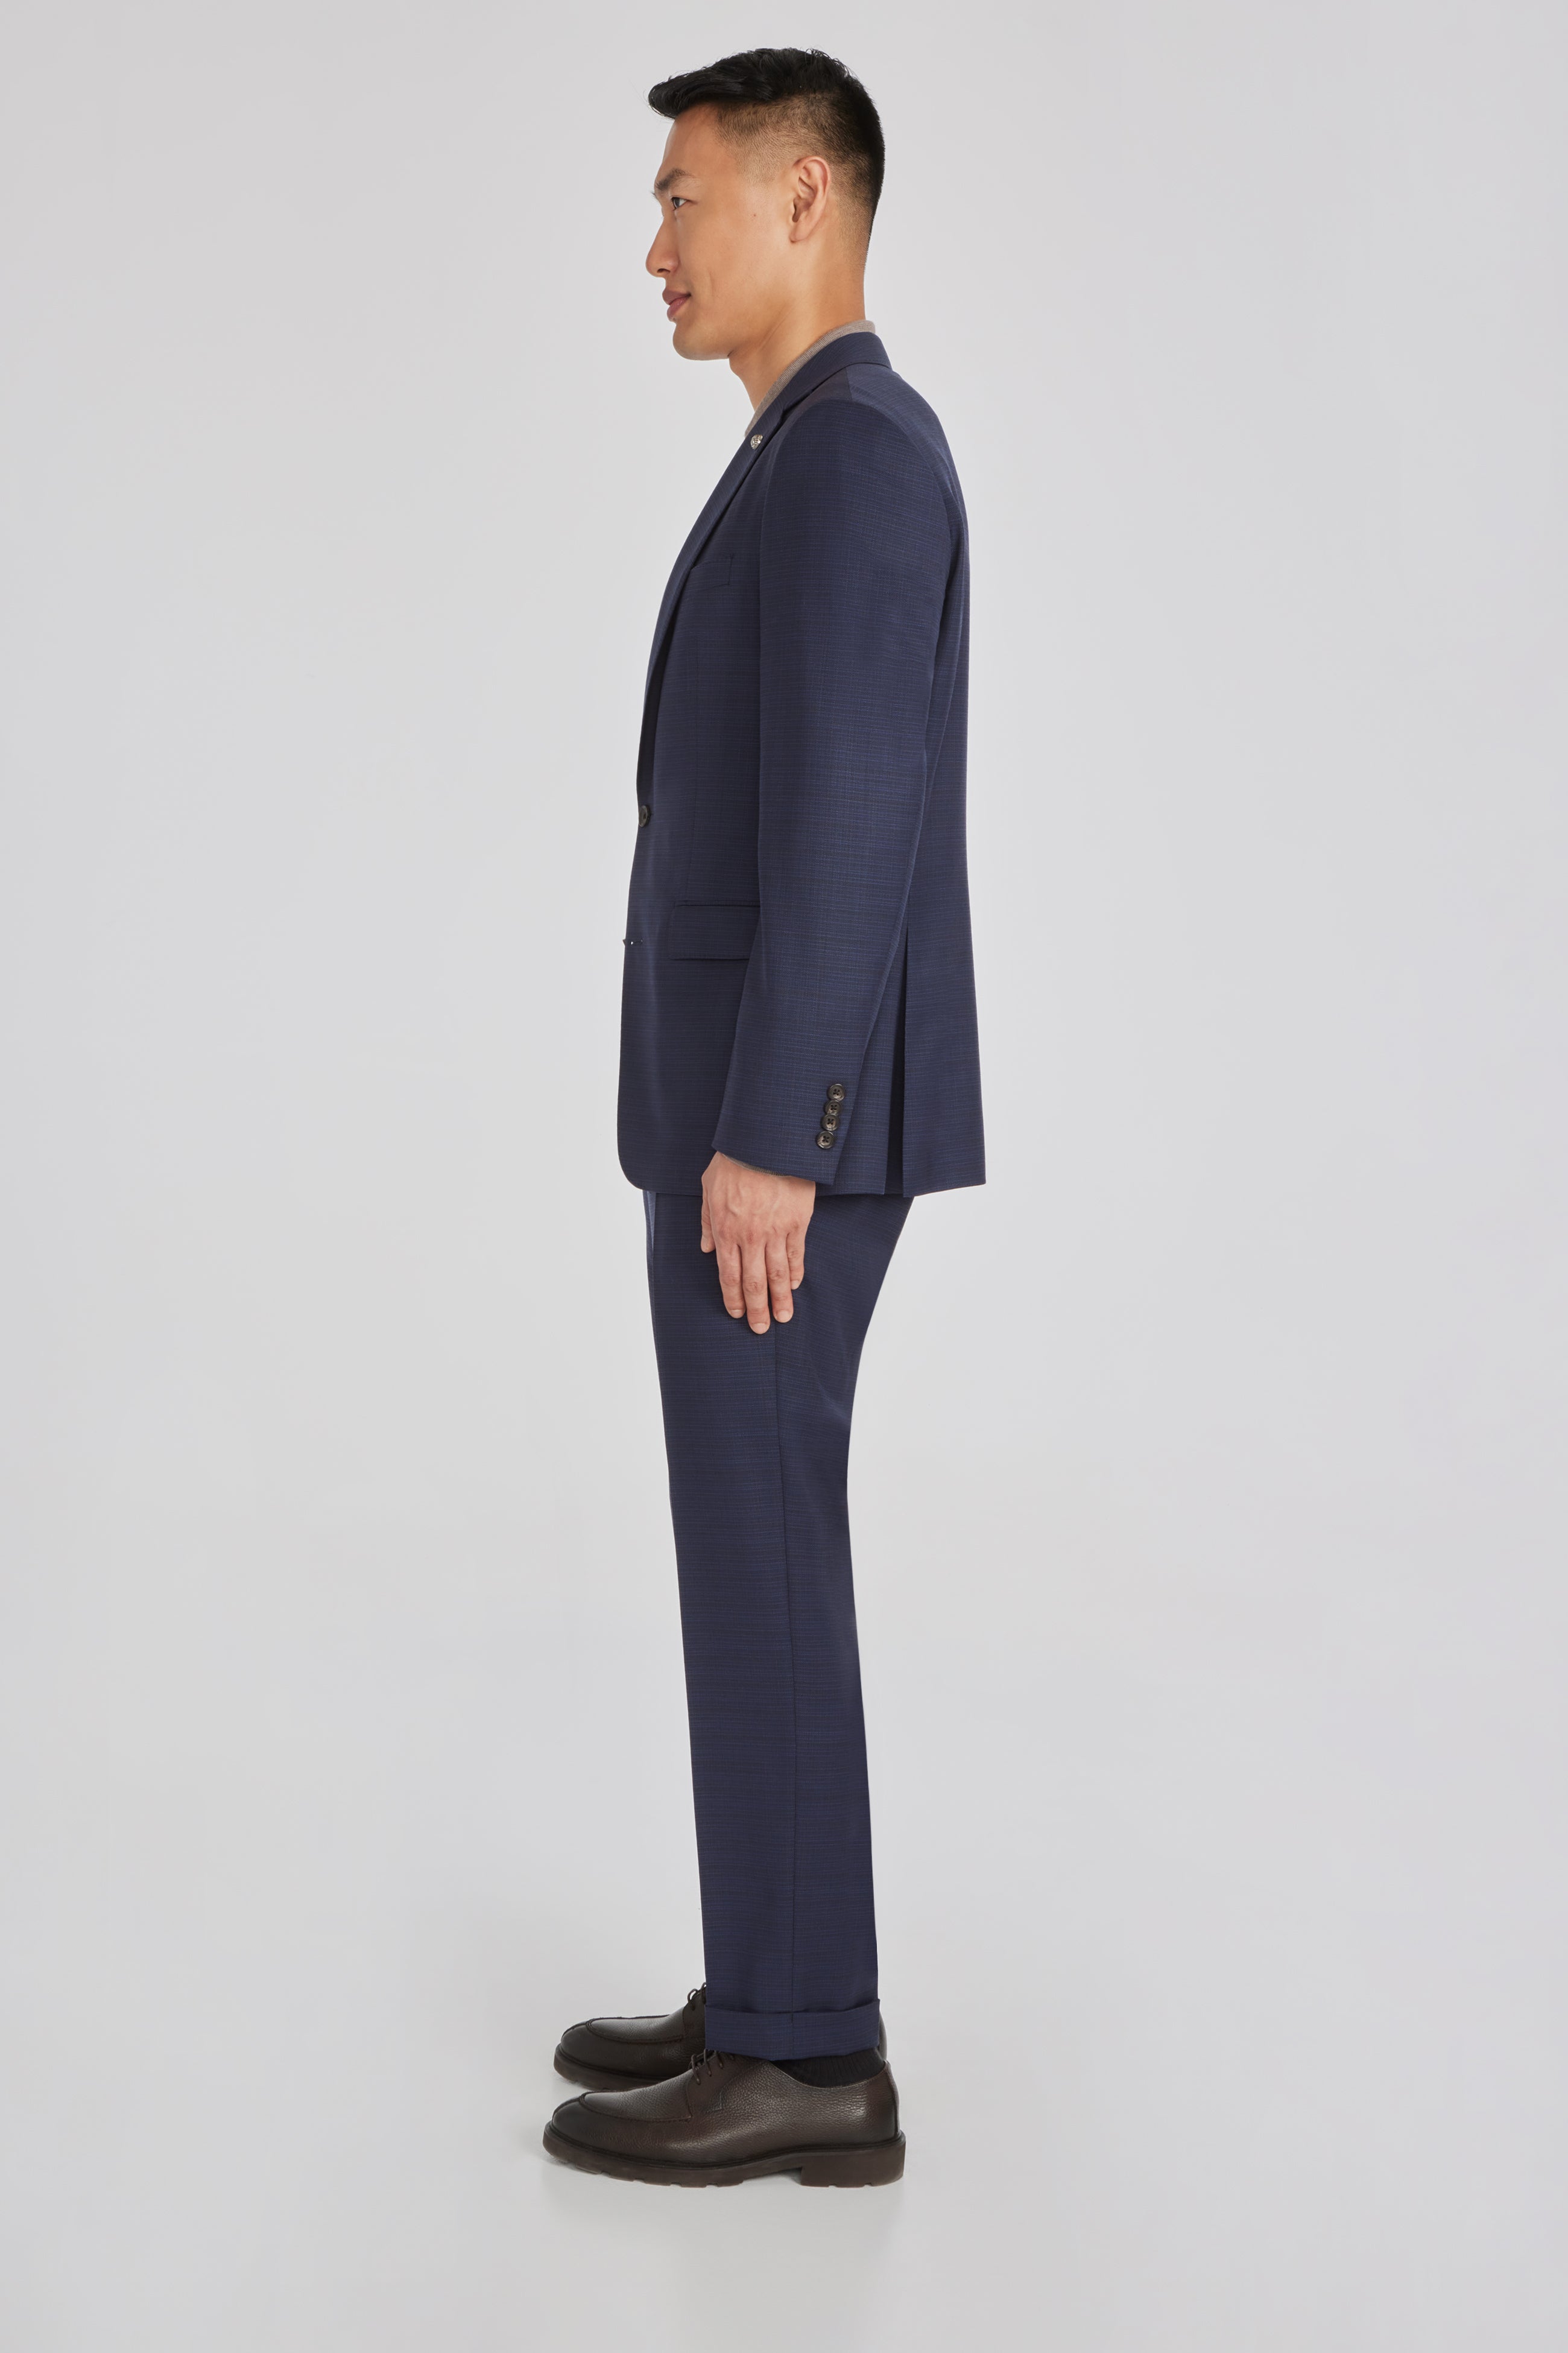 Image of Esprit Navy Micro Pattern Super 120's Wool Stretch Suit-Jack Victor